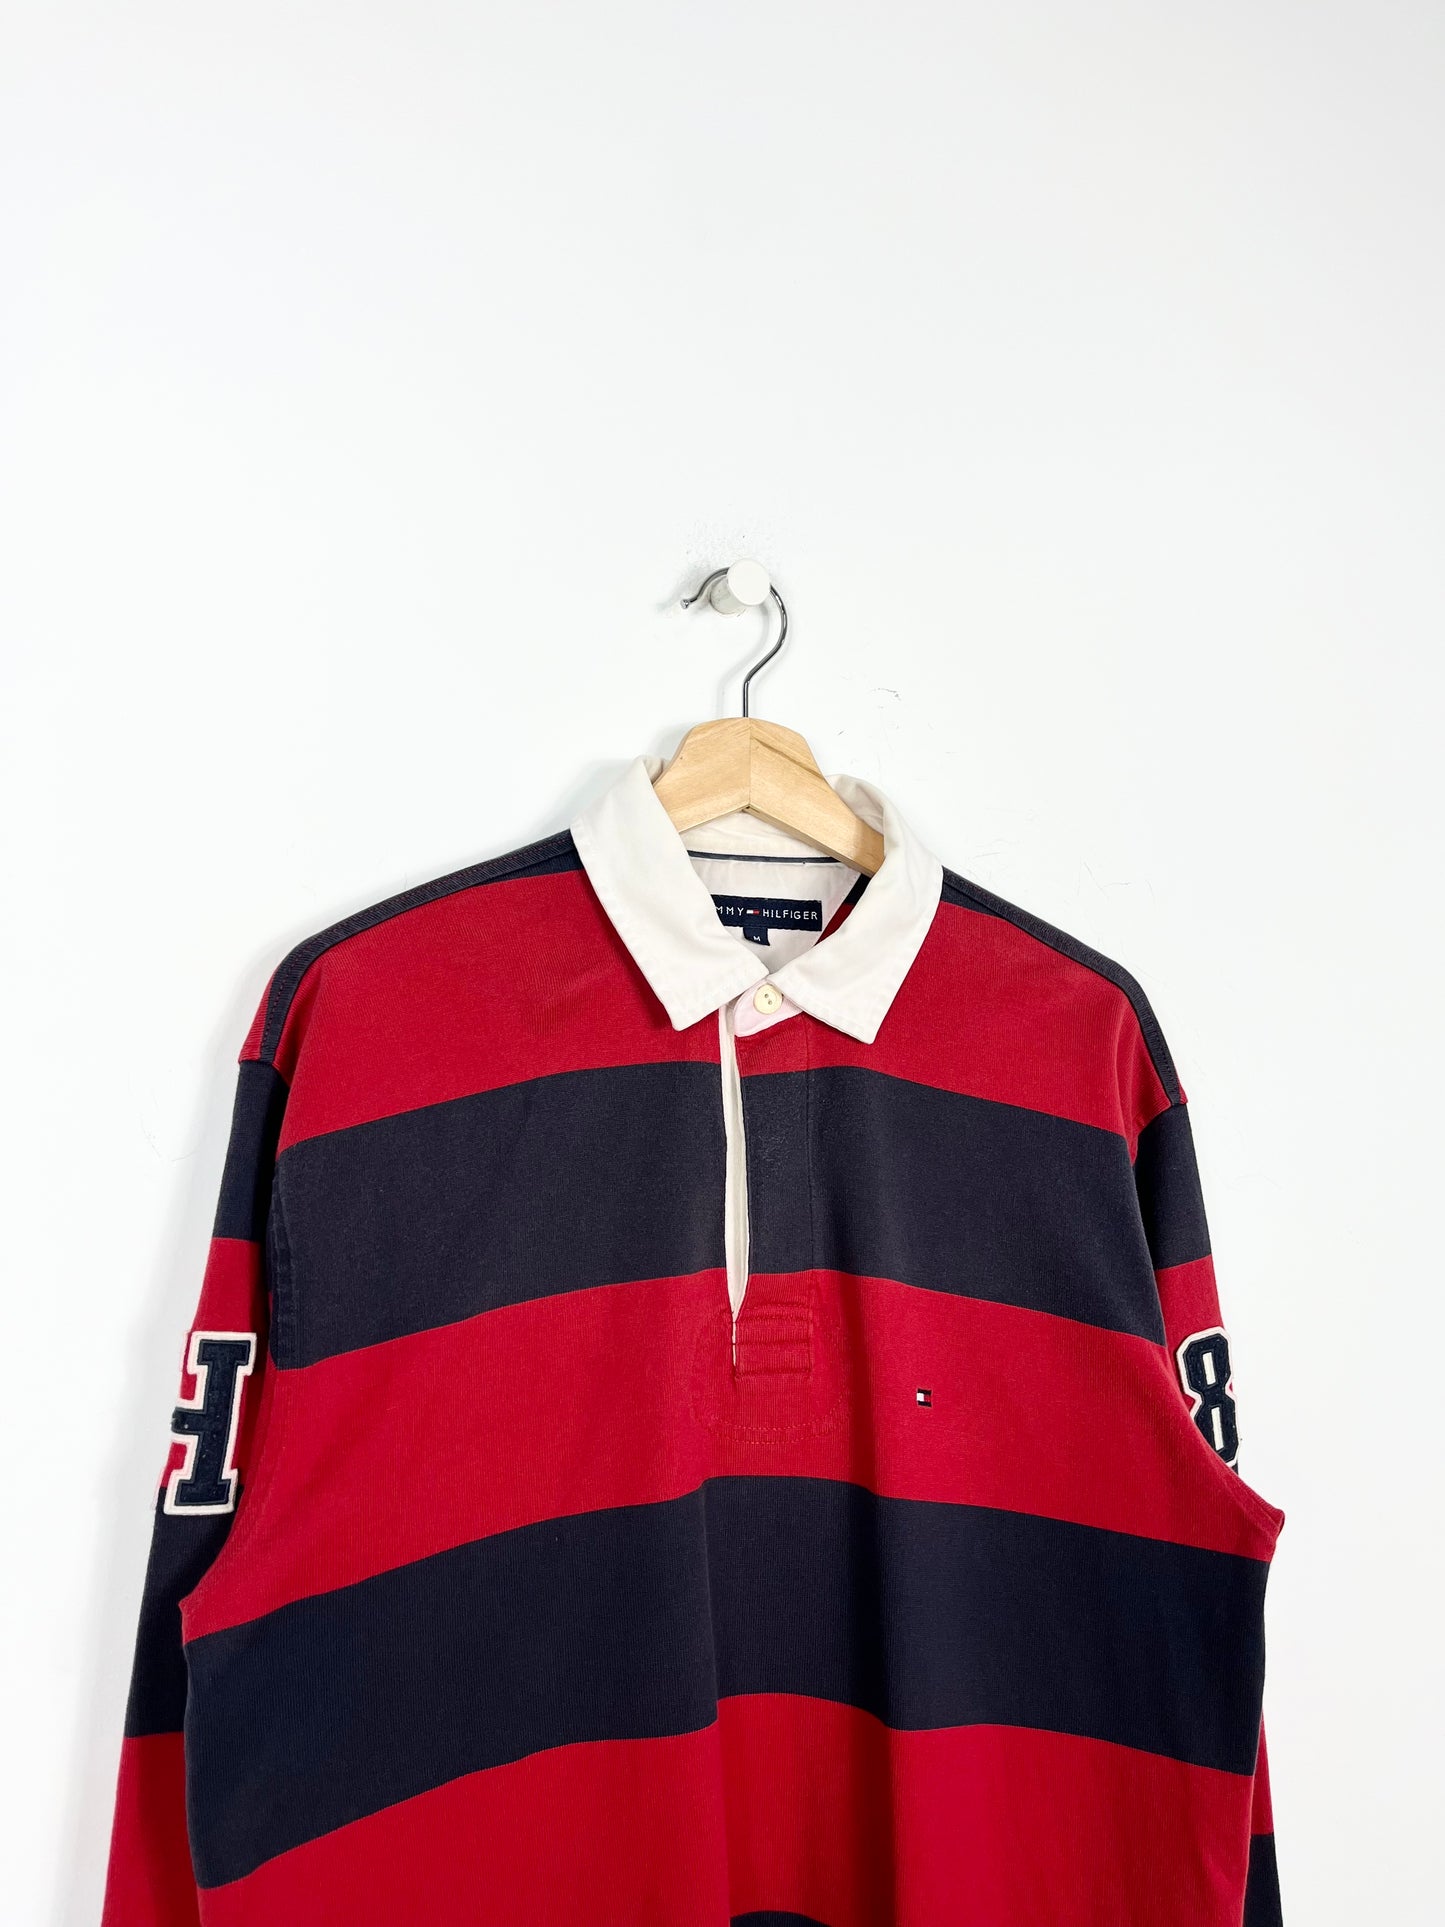 TOMMY HILFIGER VINTAGE RUGBY POLO SHIRT (M/M OVERSIZE)